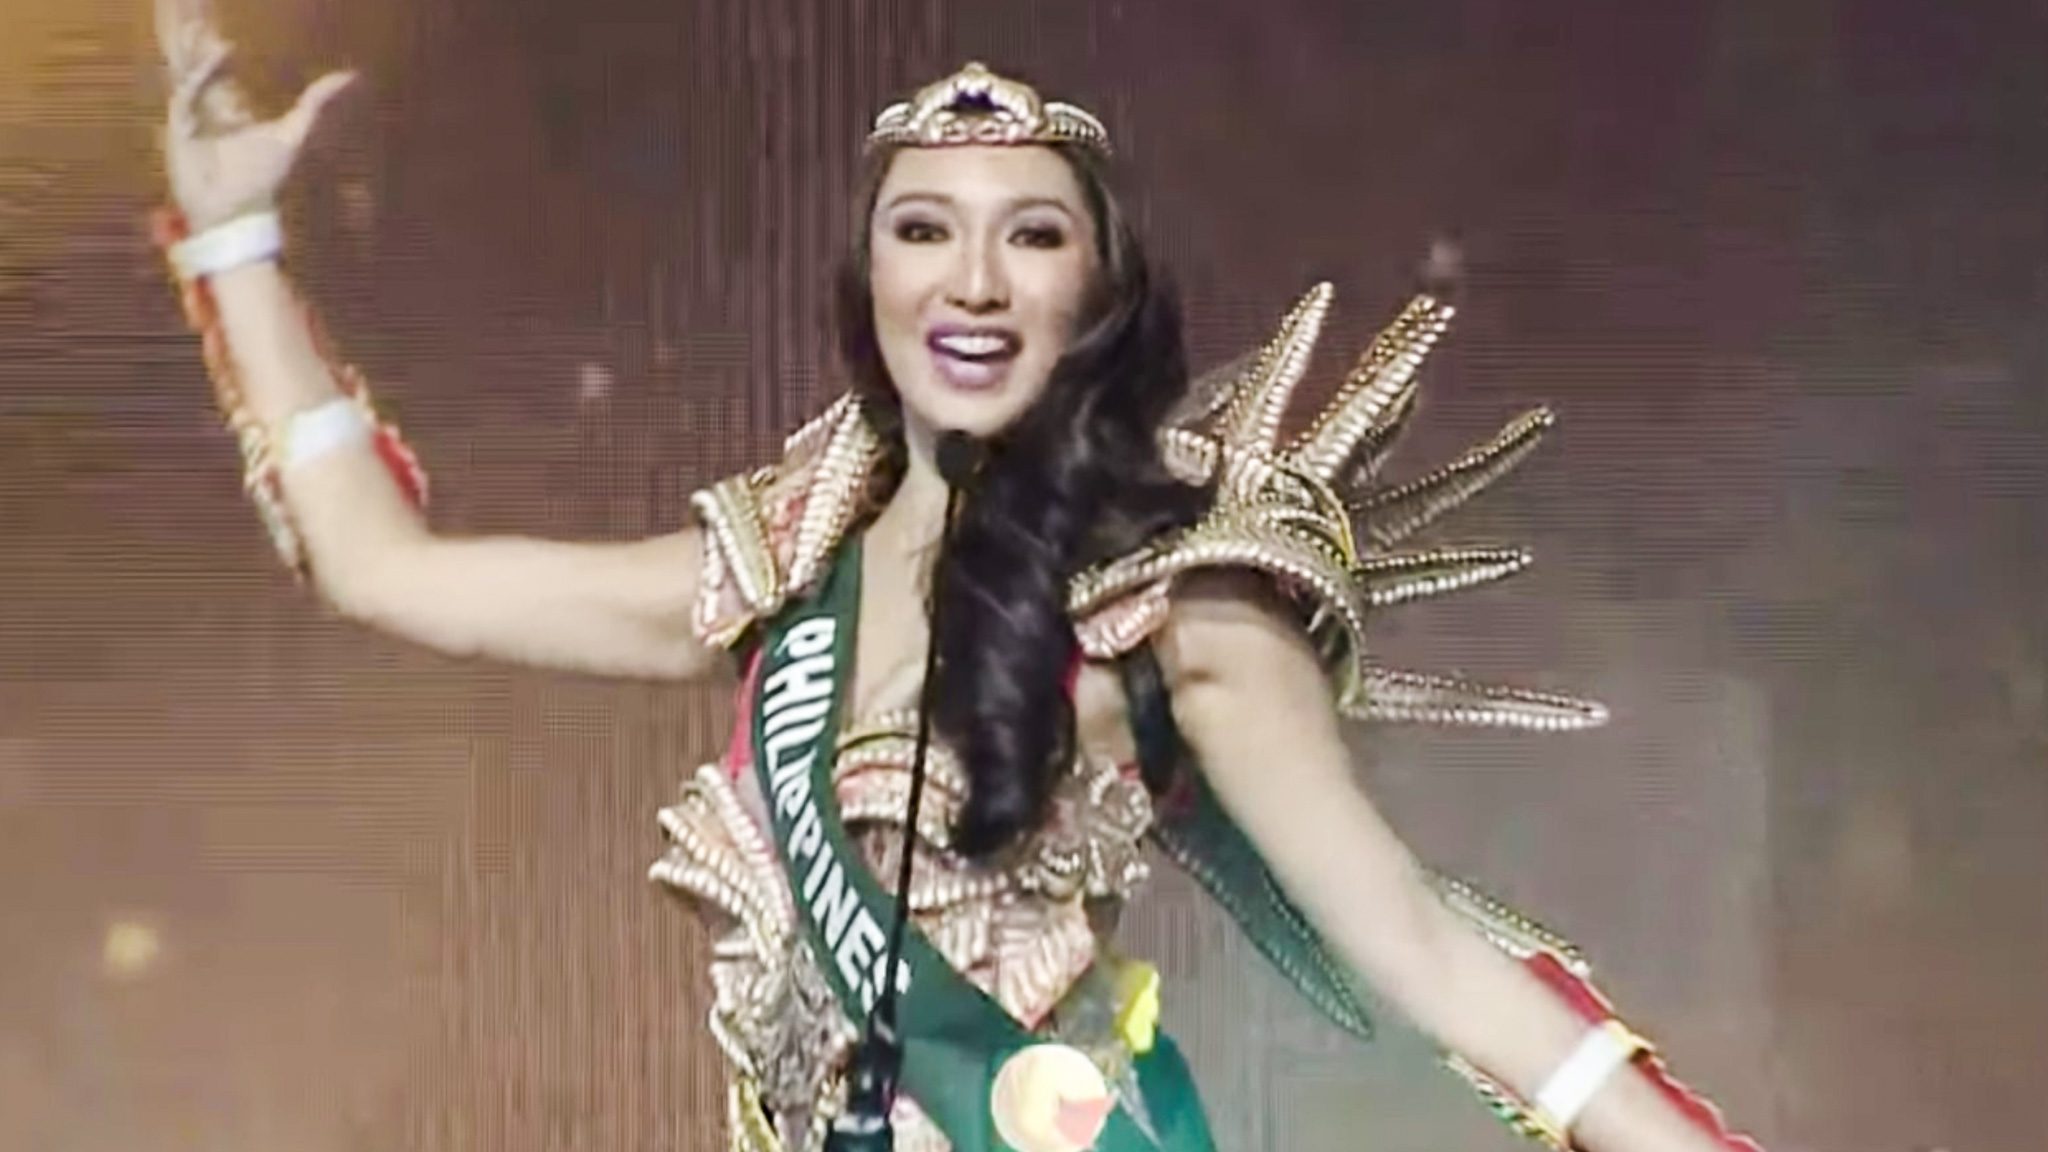 IN PHOTOS: Miss Earth 2017 delegates as superheroes